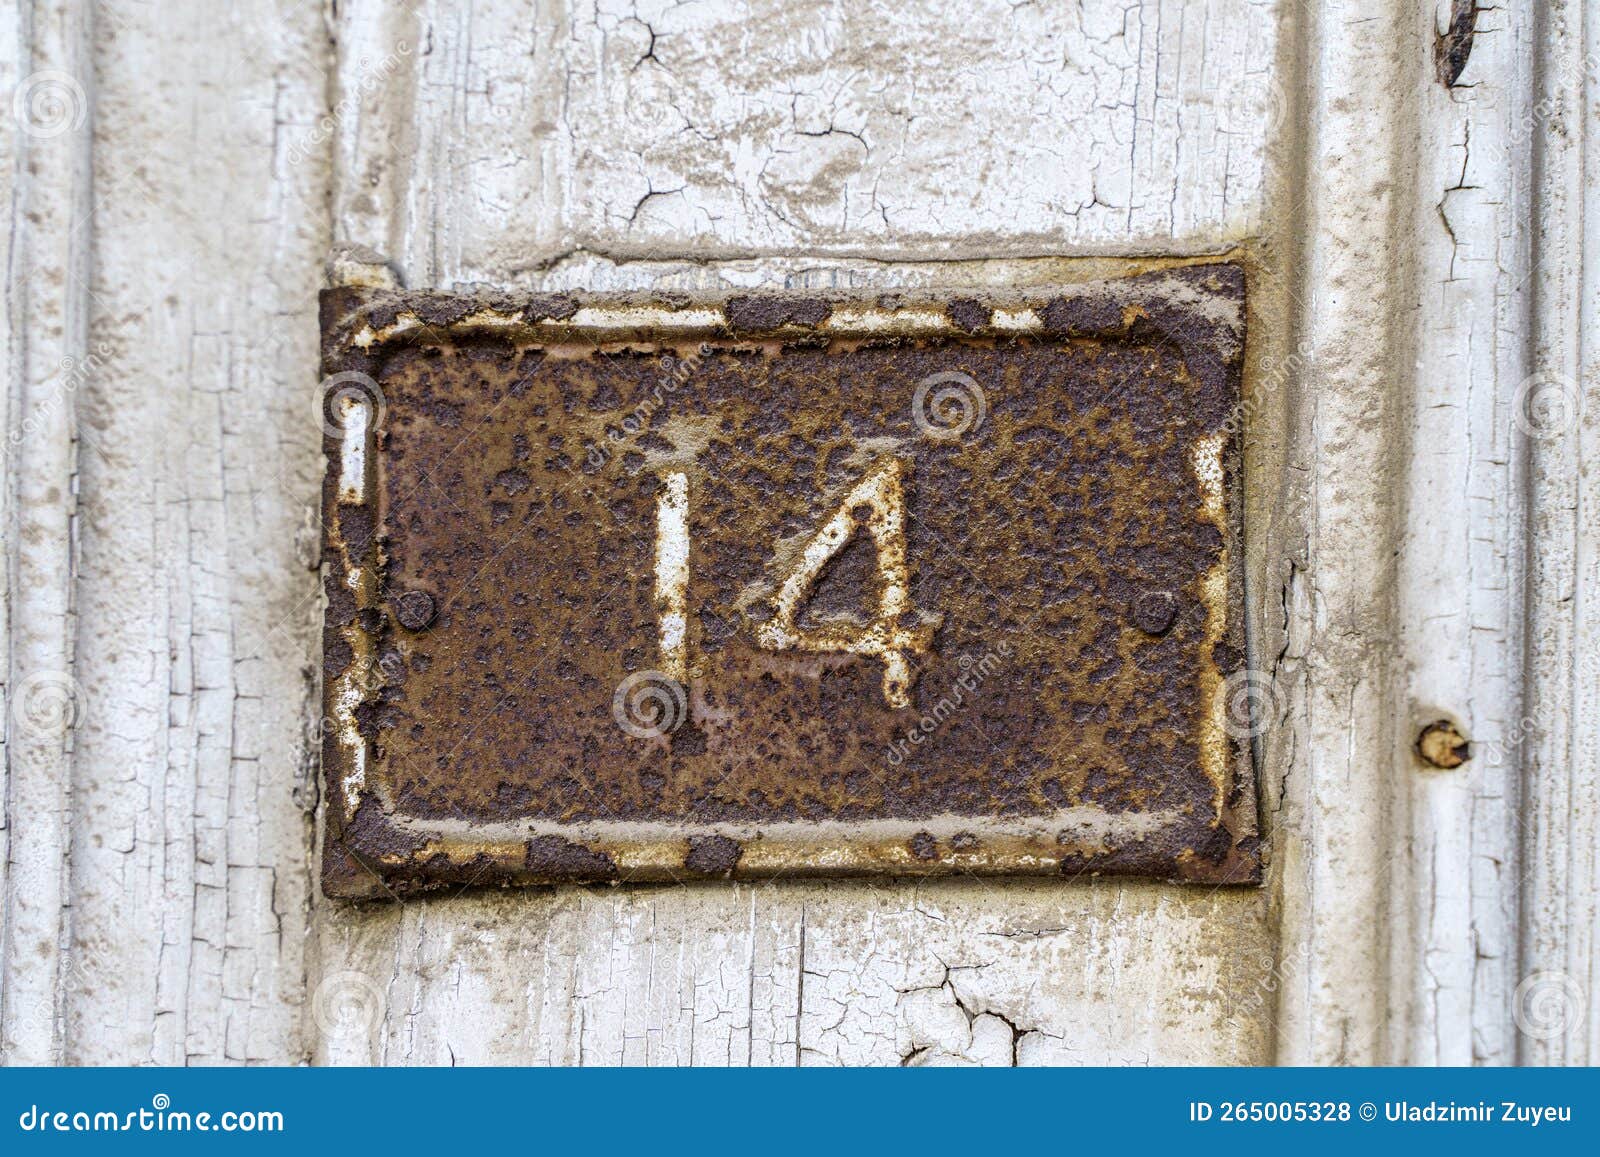 old sign with the house number 14 on the background of the wall.